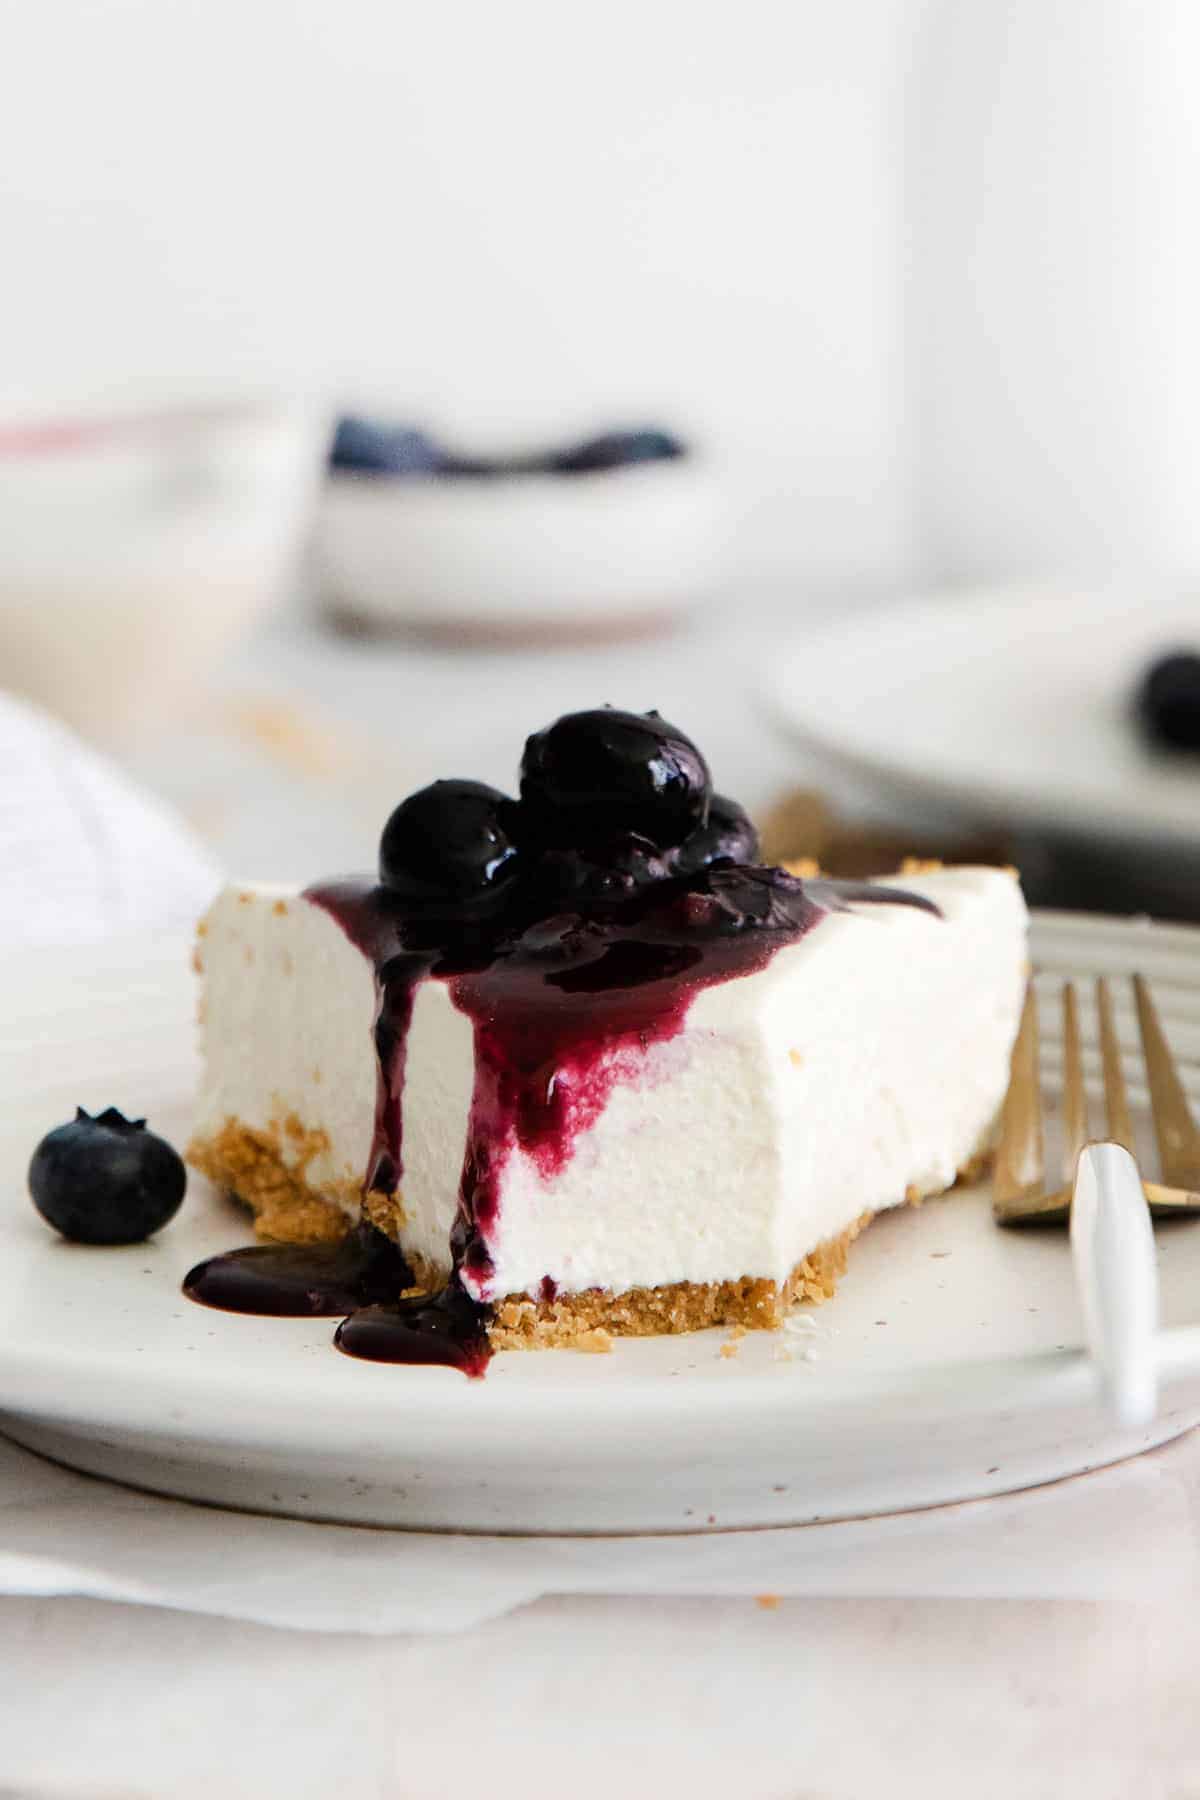 A slice of gluten-free blueberry cheesecake on a white plate.